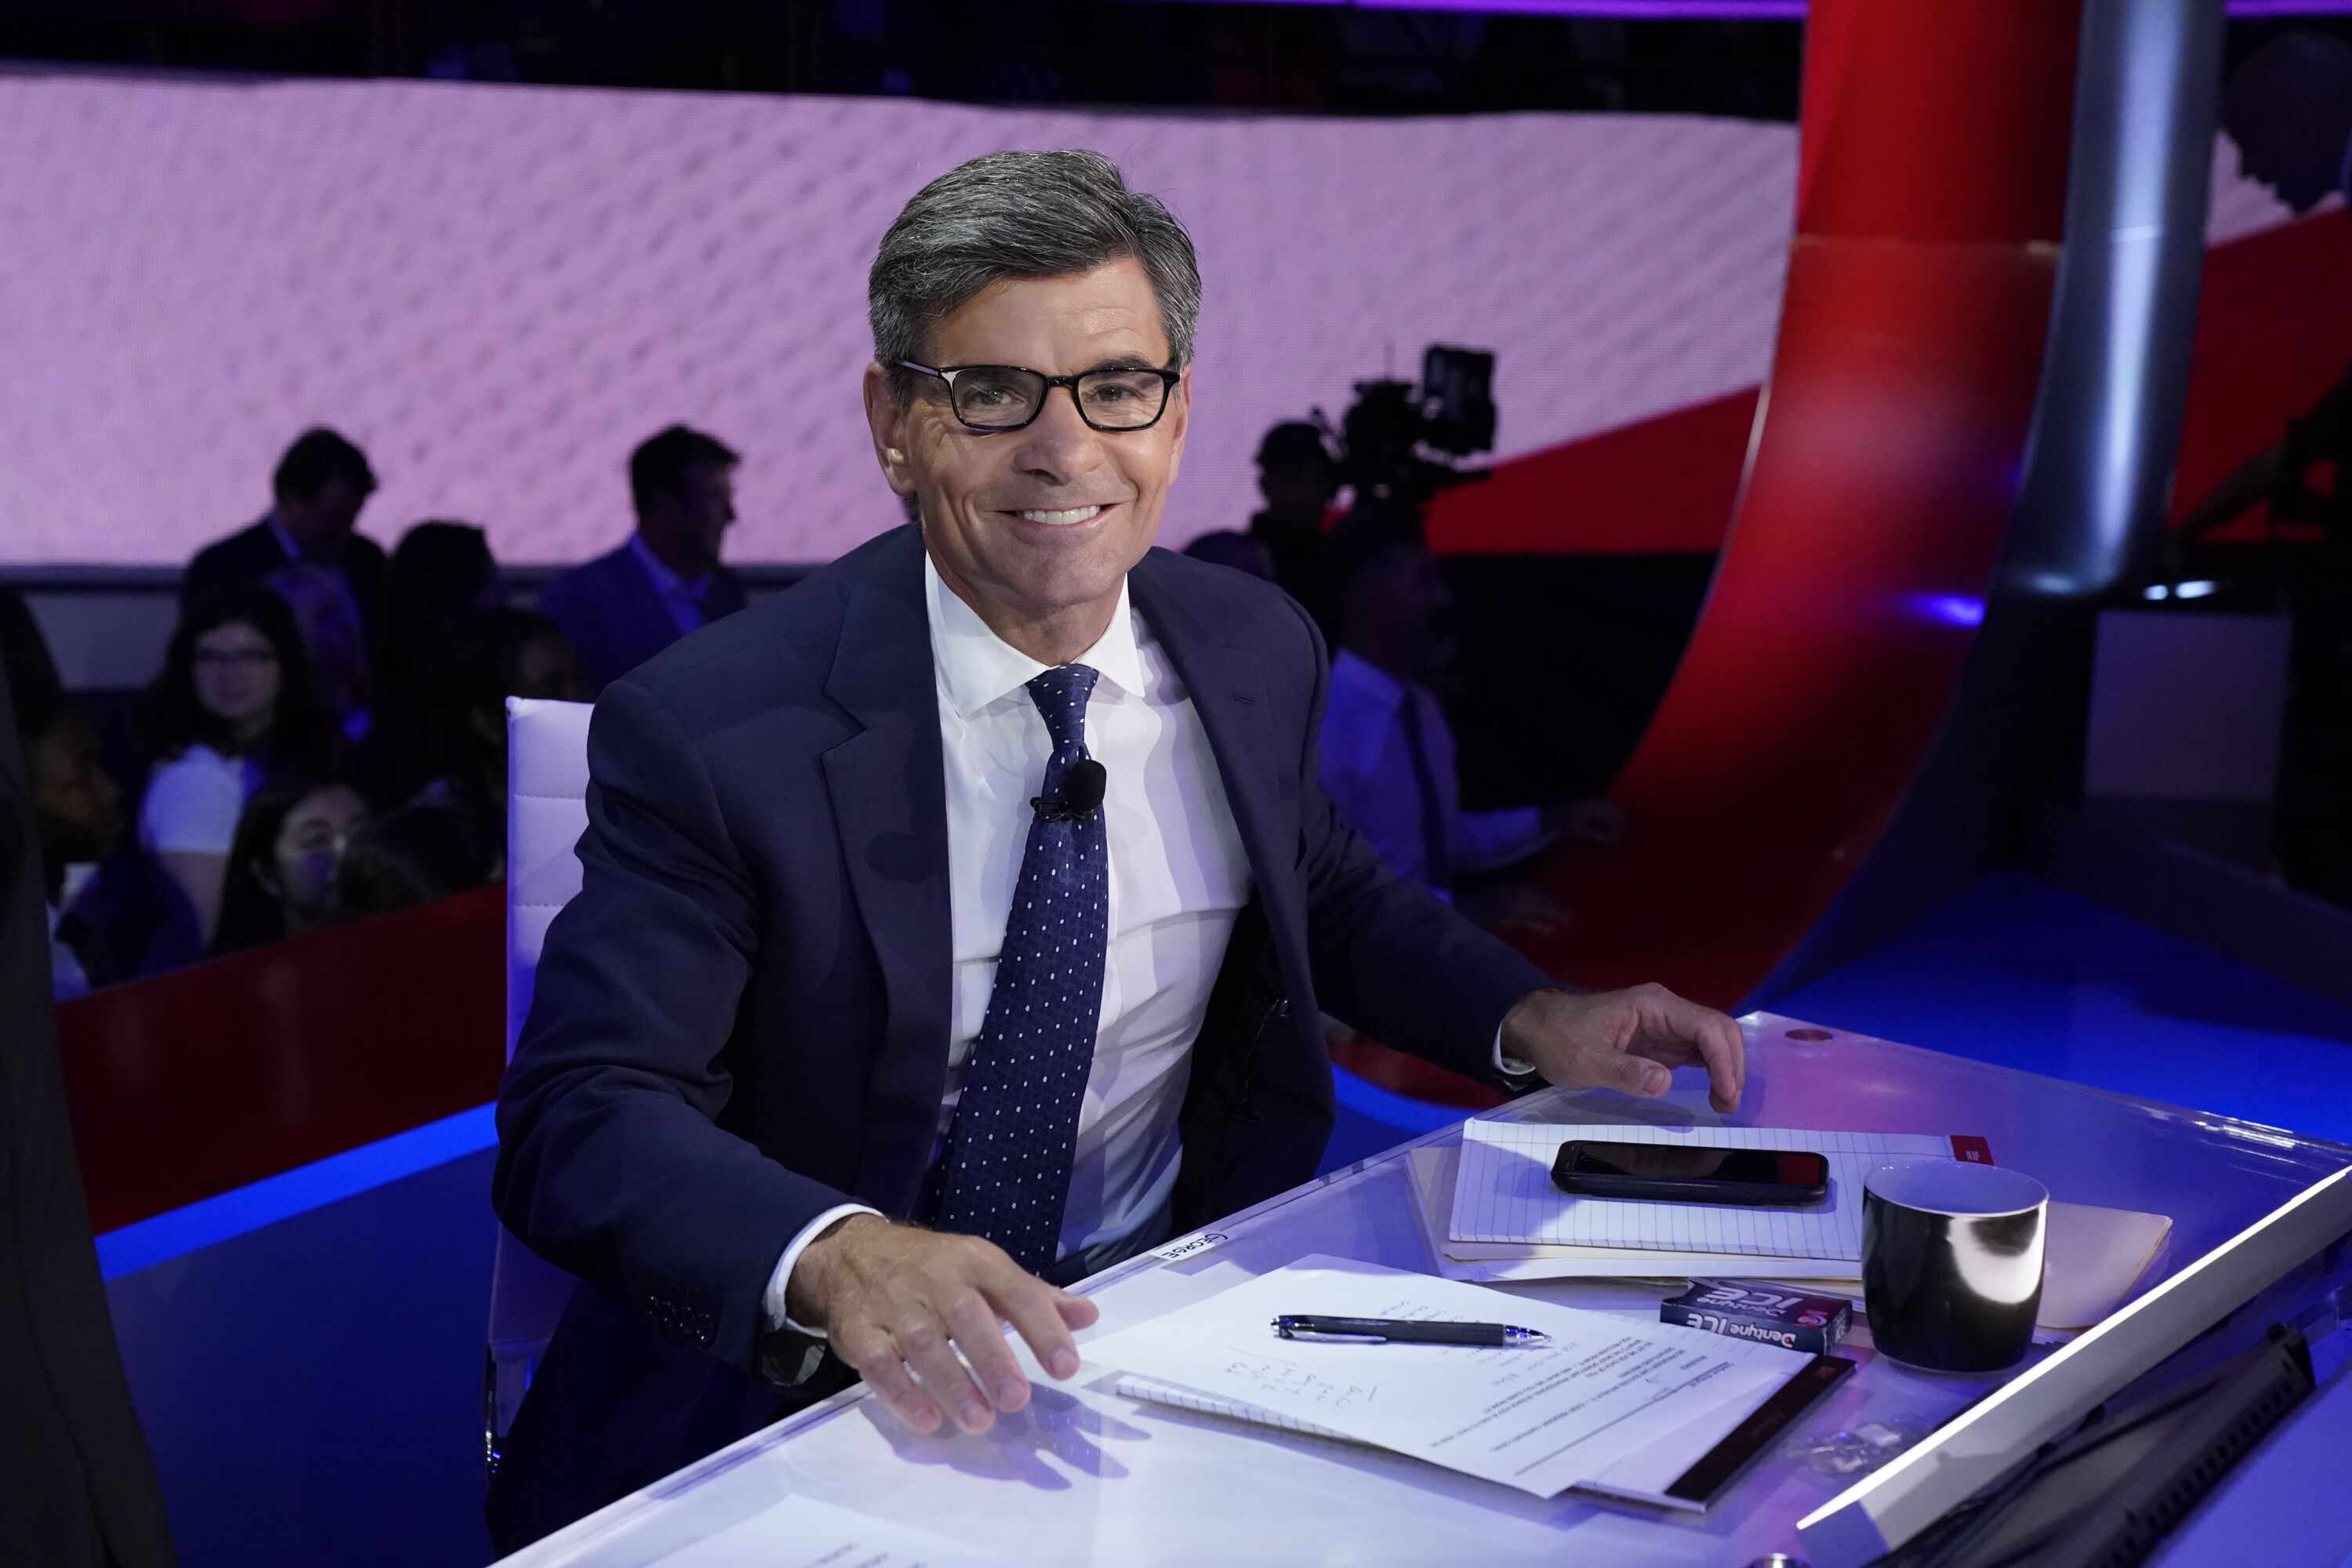 George Stephanopoulos moderate the Democratic debate from Texas Southern University's Health & PE Center in Houston, TX on Thursday, September 12 | Photo: Getty Images  